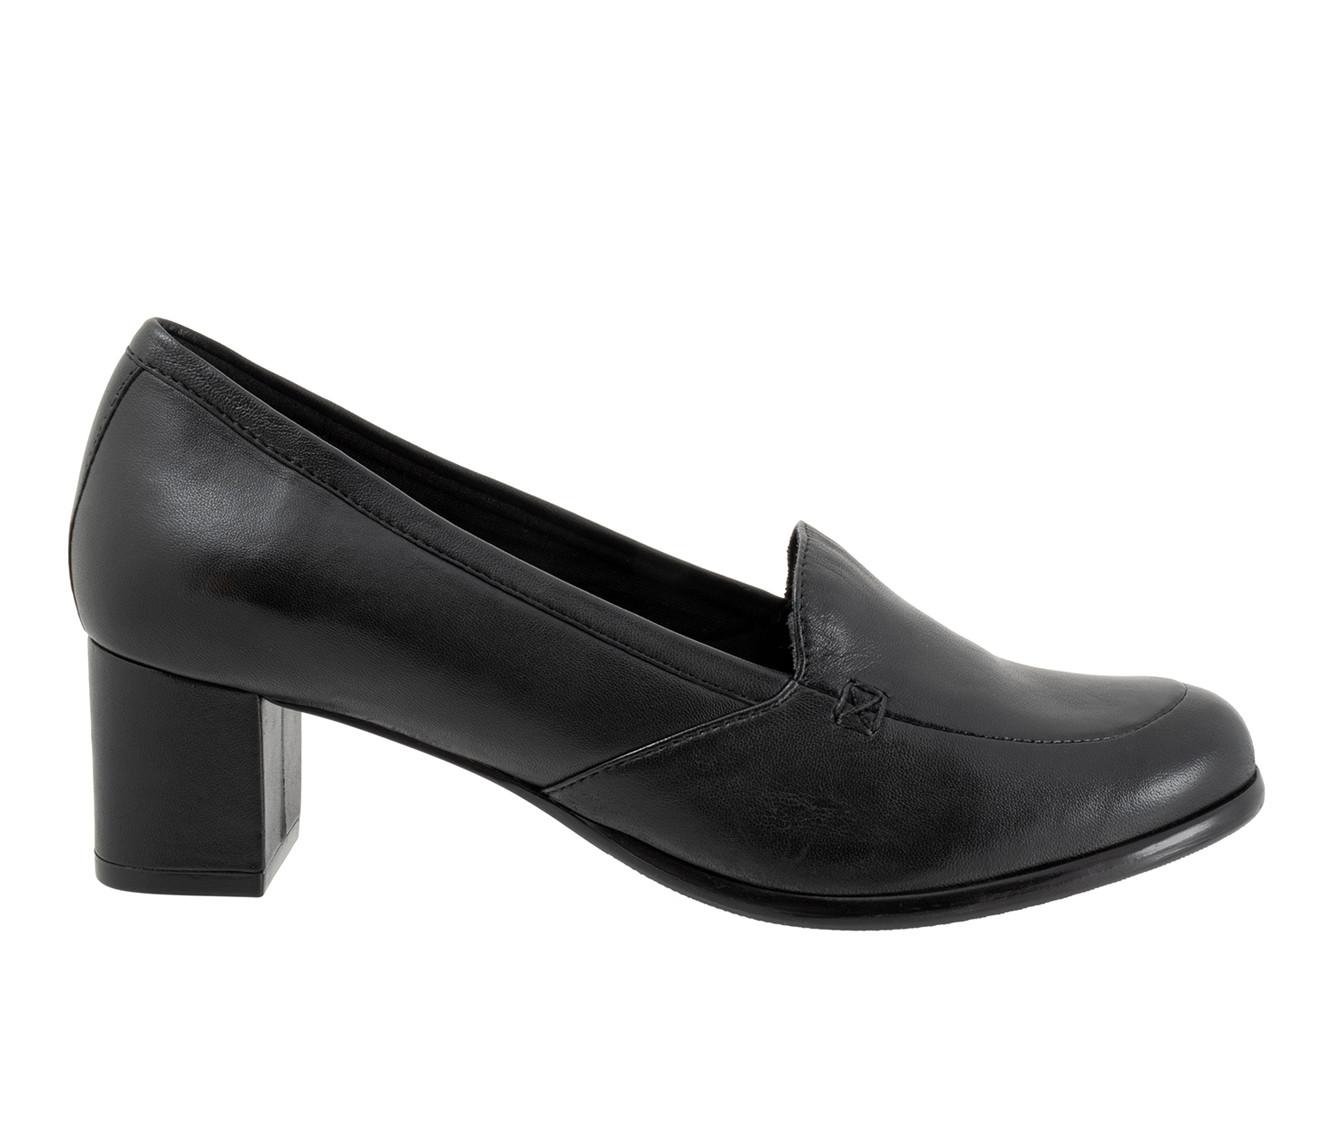 Women's Trotters Cassidy Pumps